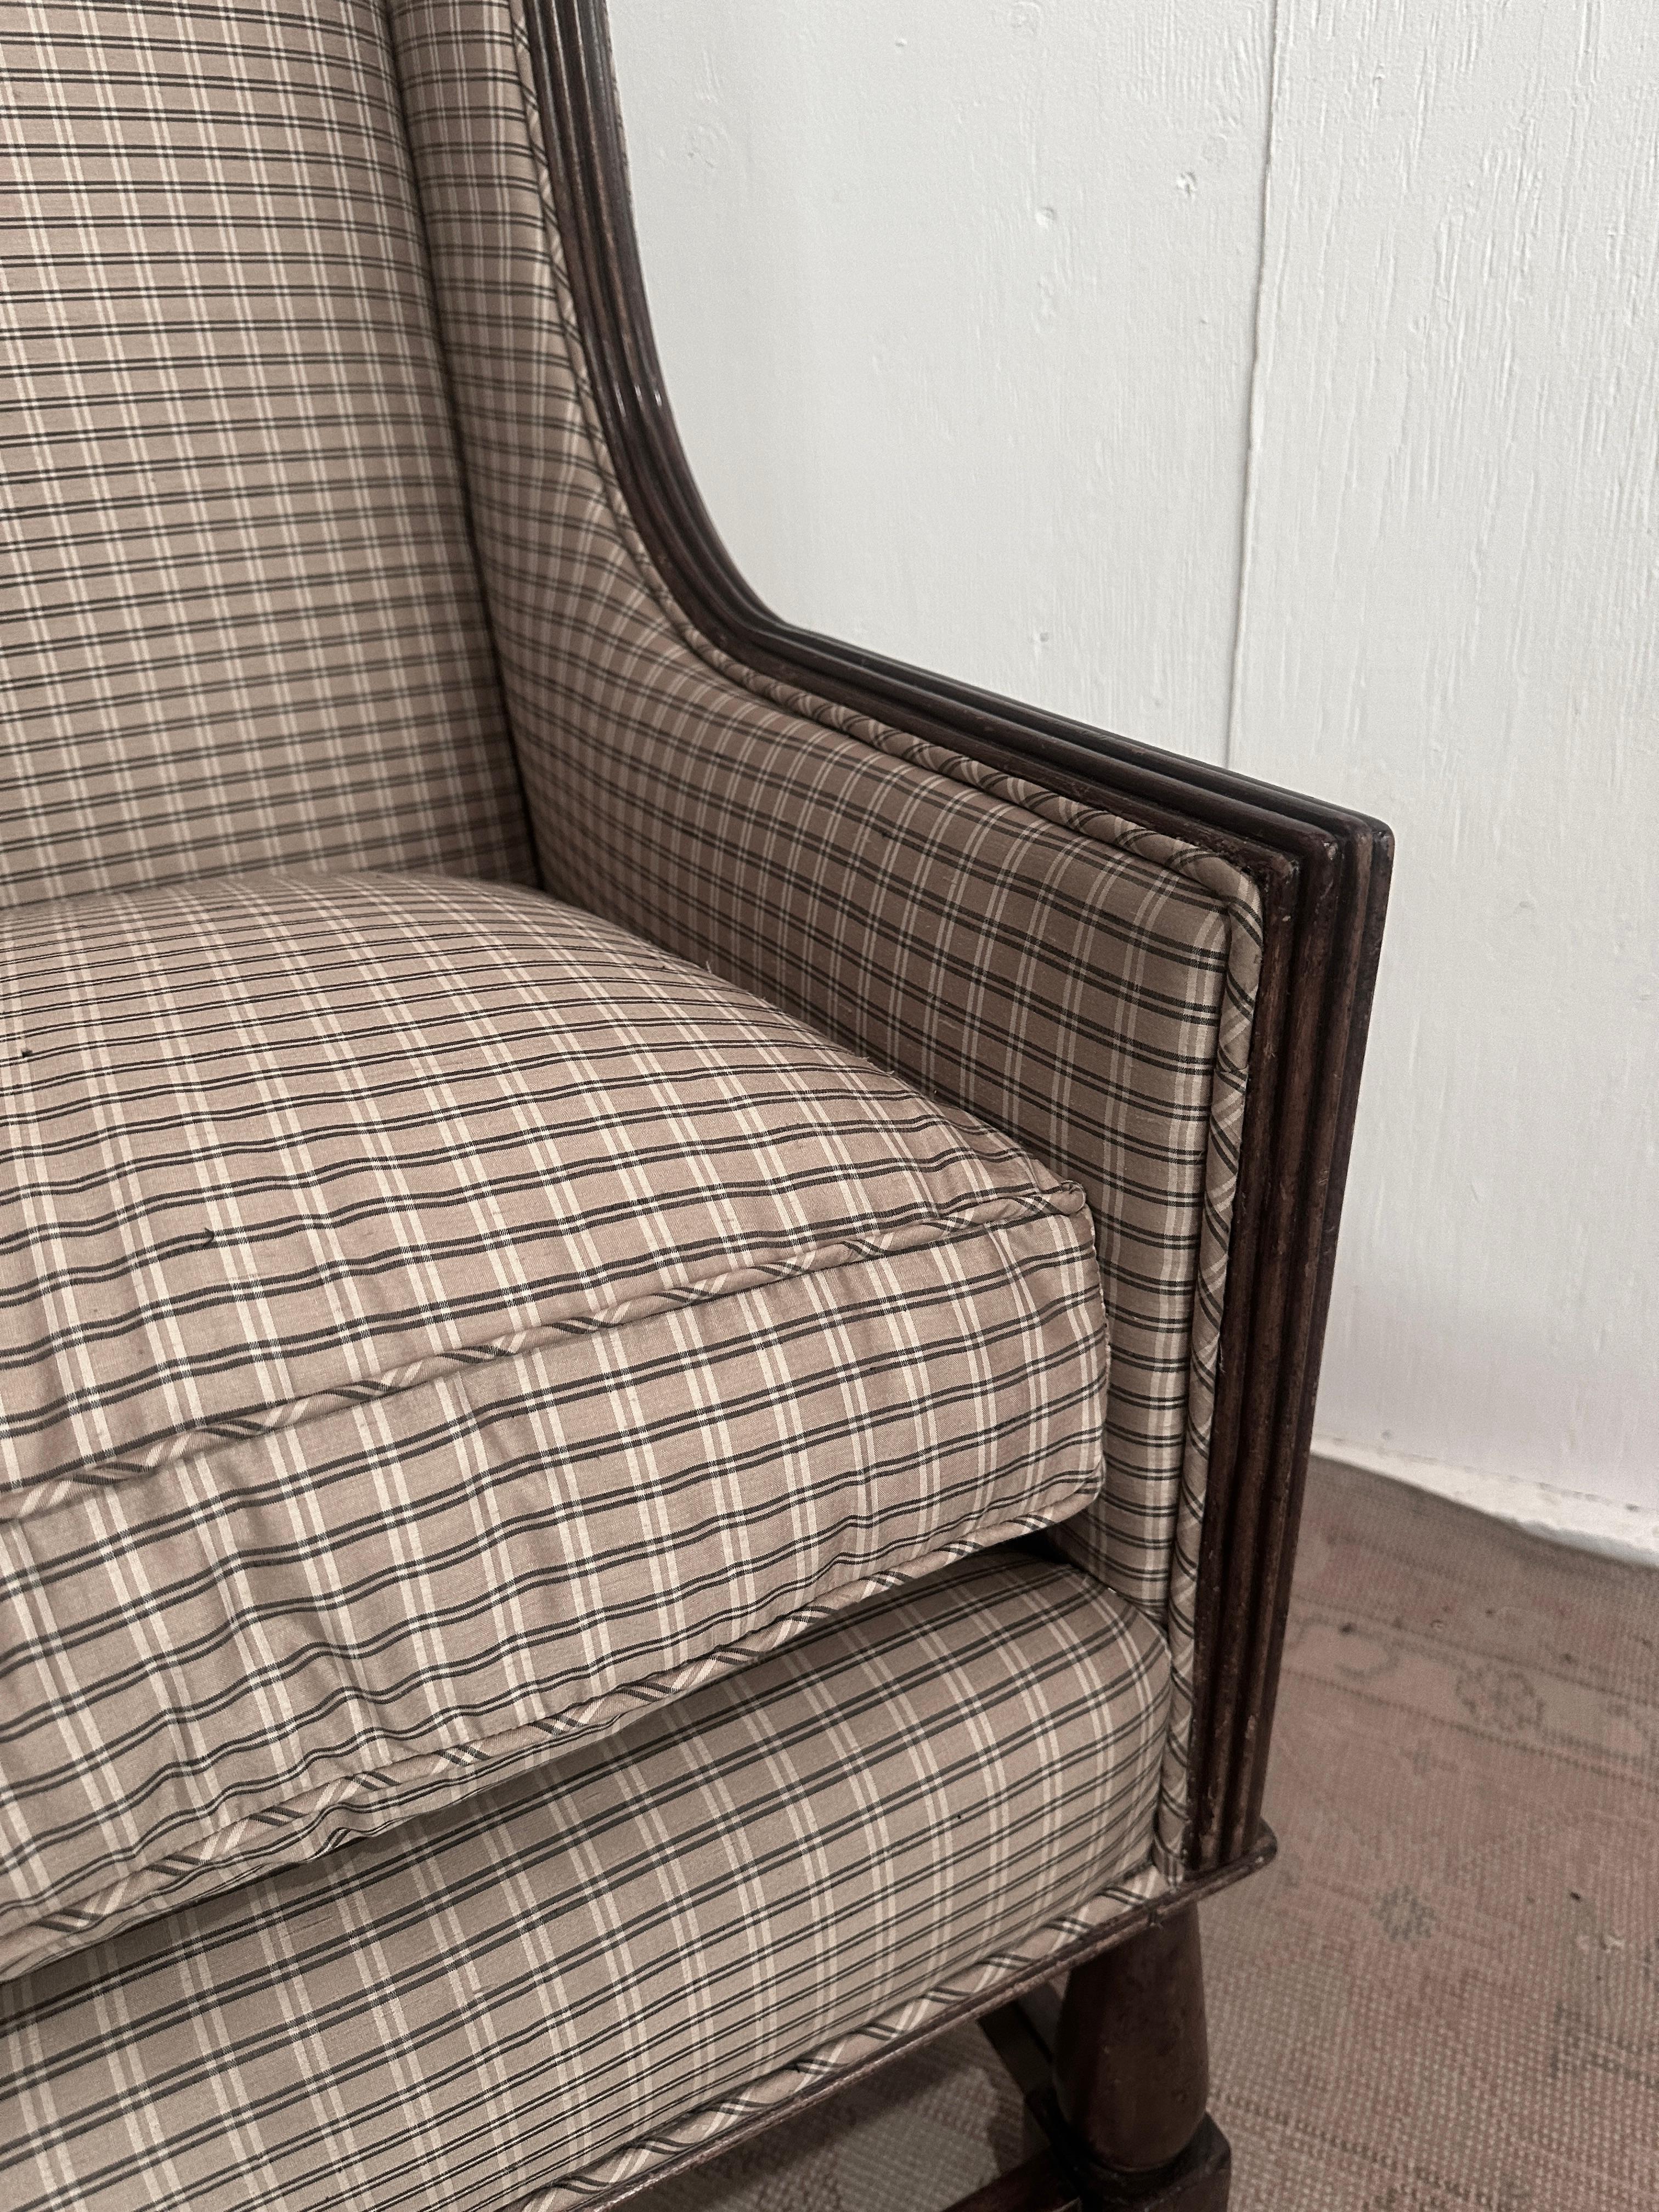 Hand-Crafted  Italian Lounge Chairs in Walnut -a pair - newly upholstered in Silk Plaid For Sale